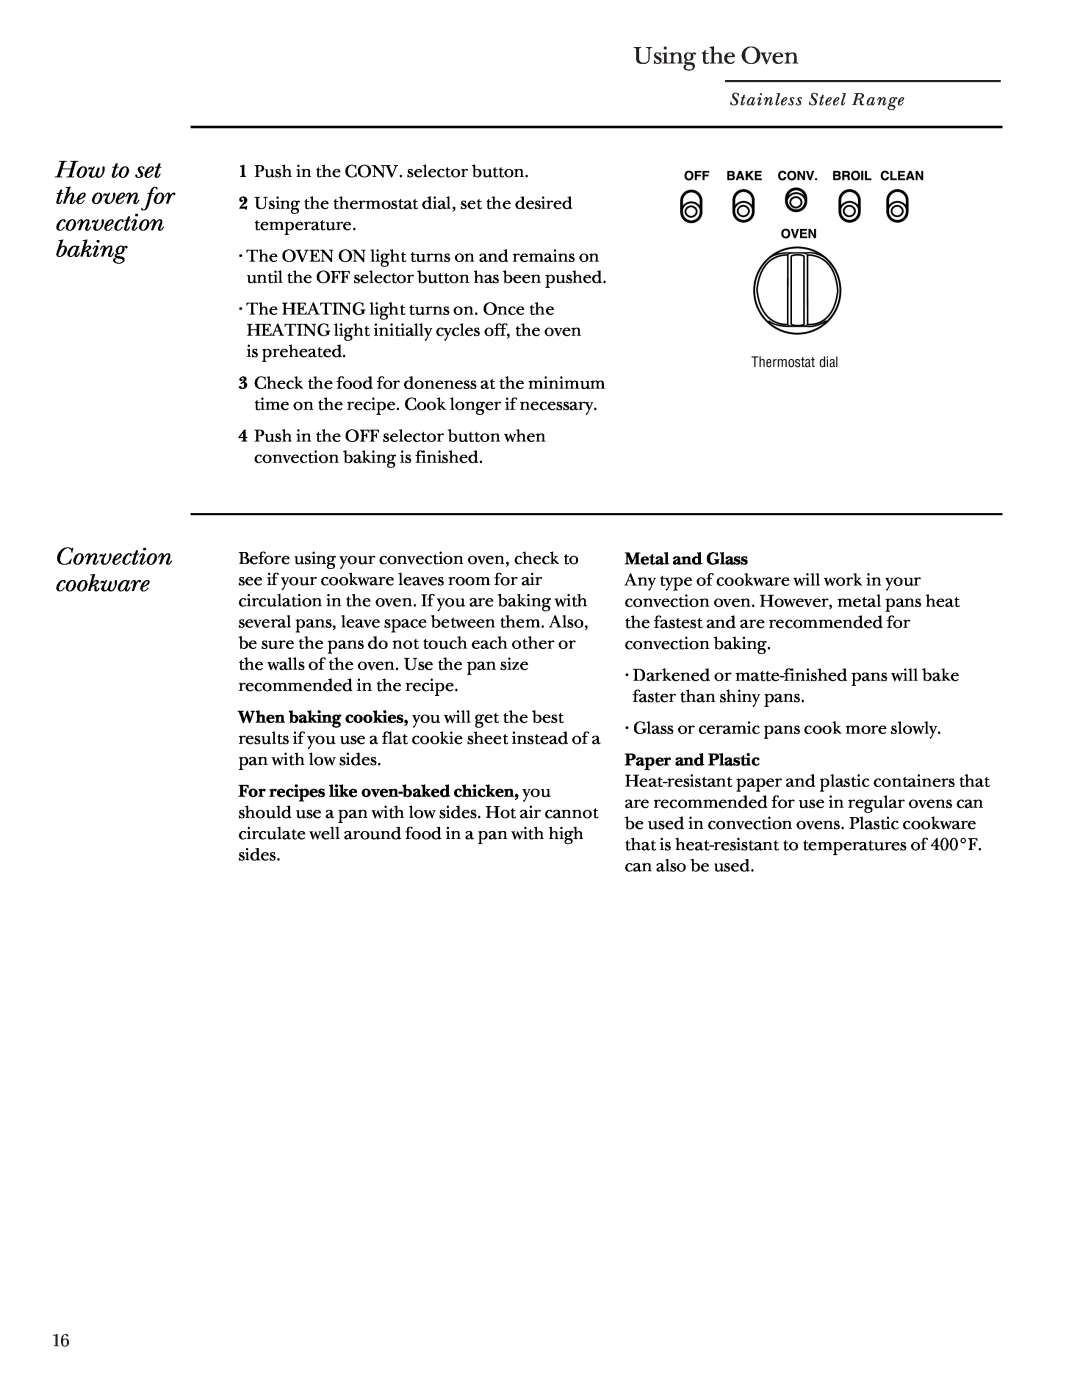 GE Monogram 164D4290P031 owner manual How to set the oven for convection baking, Convection cookware, Using the Oven 